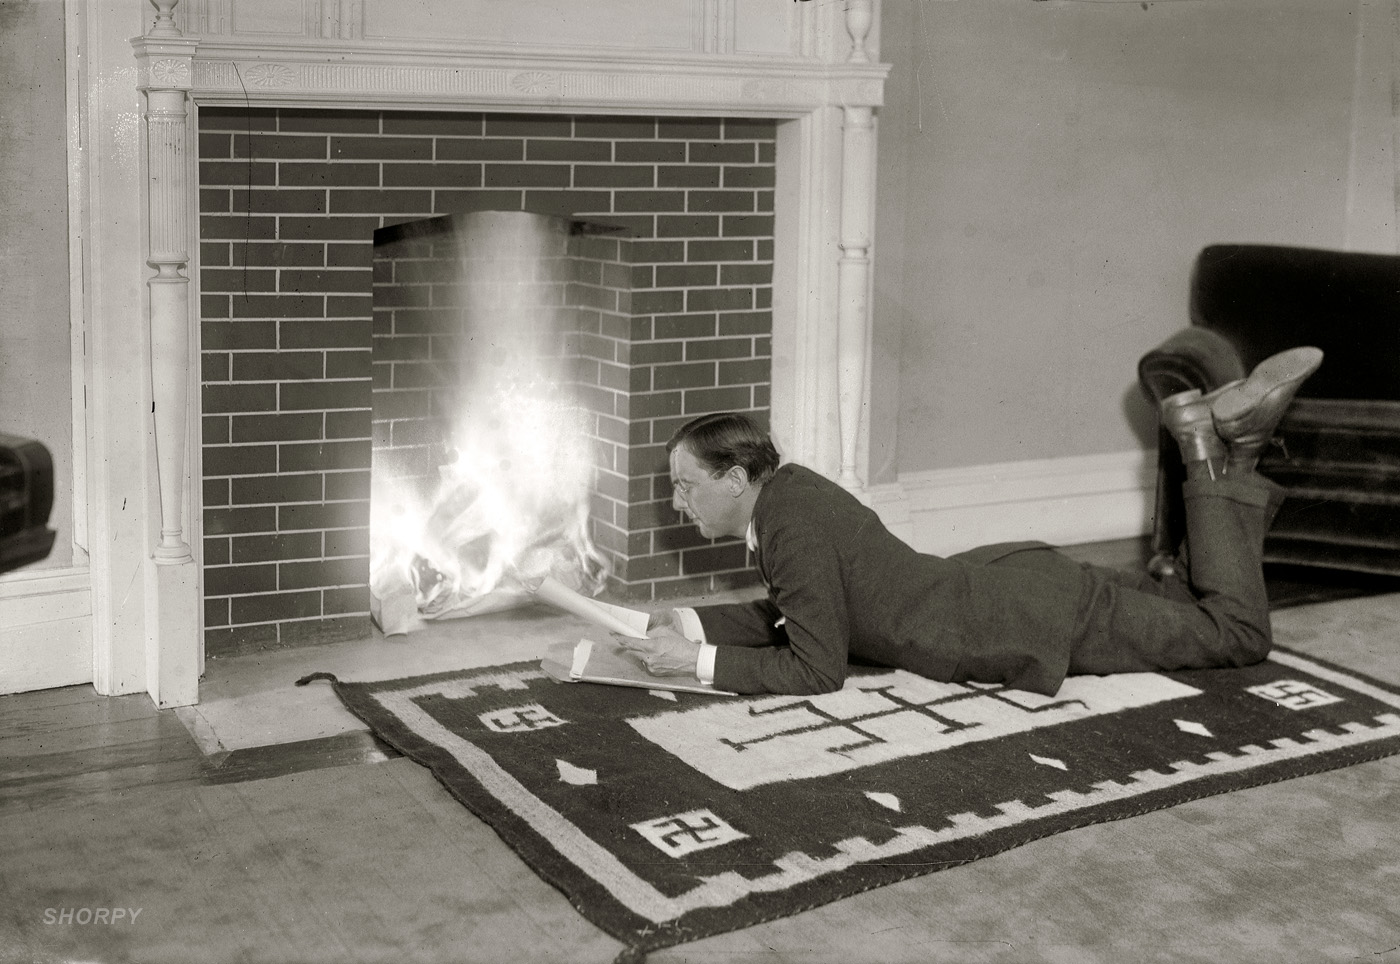 New York circa 1919. The producer, playwright and director  Stuart Walker, who had a long career in theater and film, spending a quiet night at home tossing scripts into the fire. George Grantham Bain Collection glass negative. View full size.